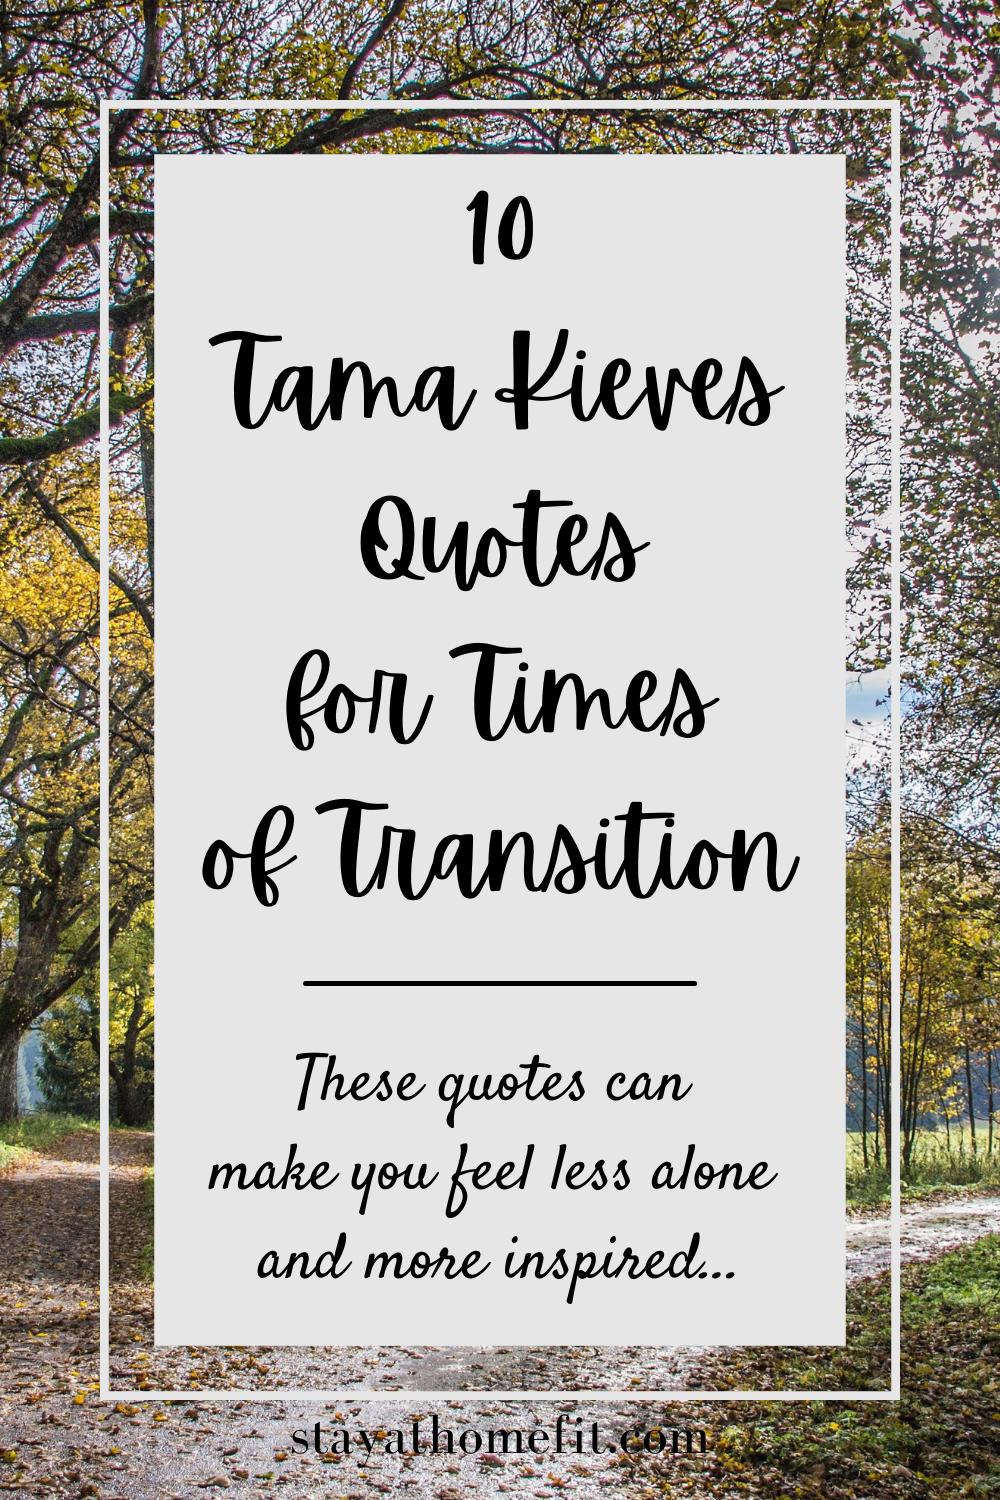 10 Tama Kieves Quotes for Times of Transition